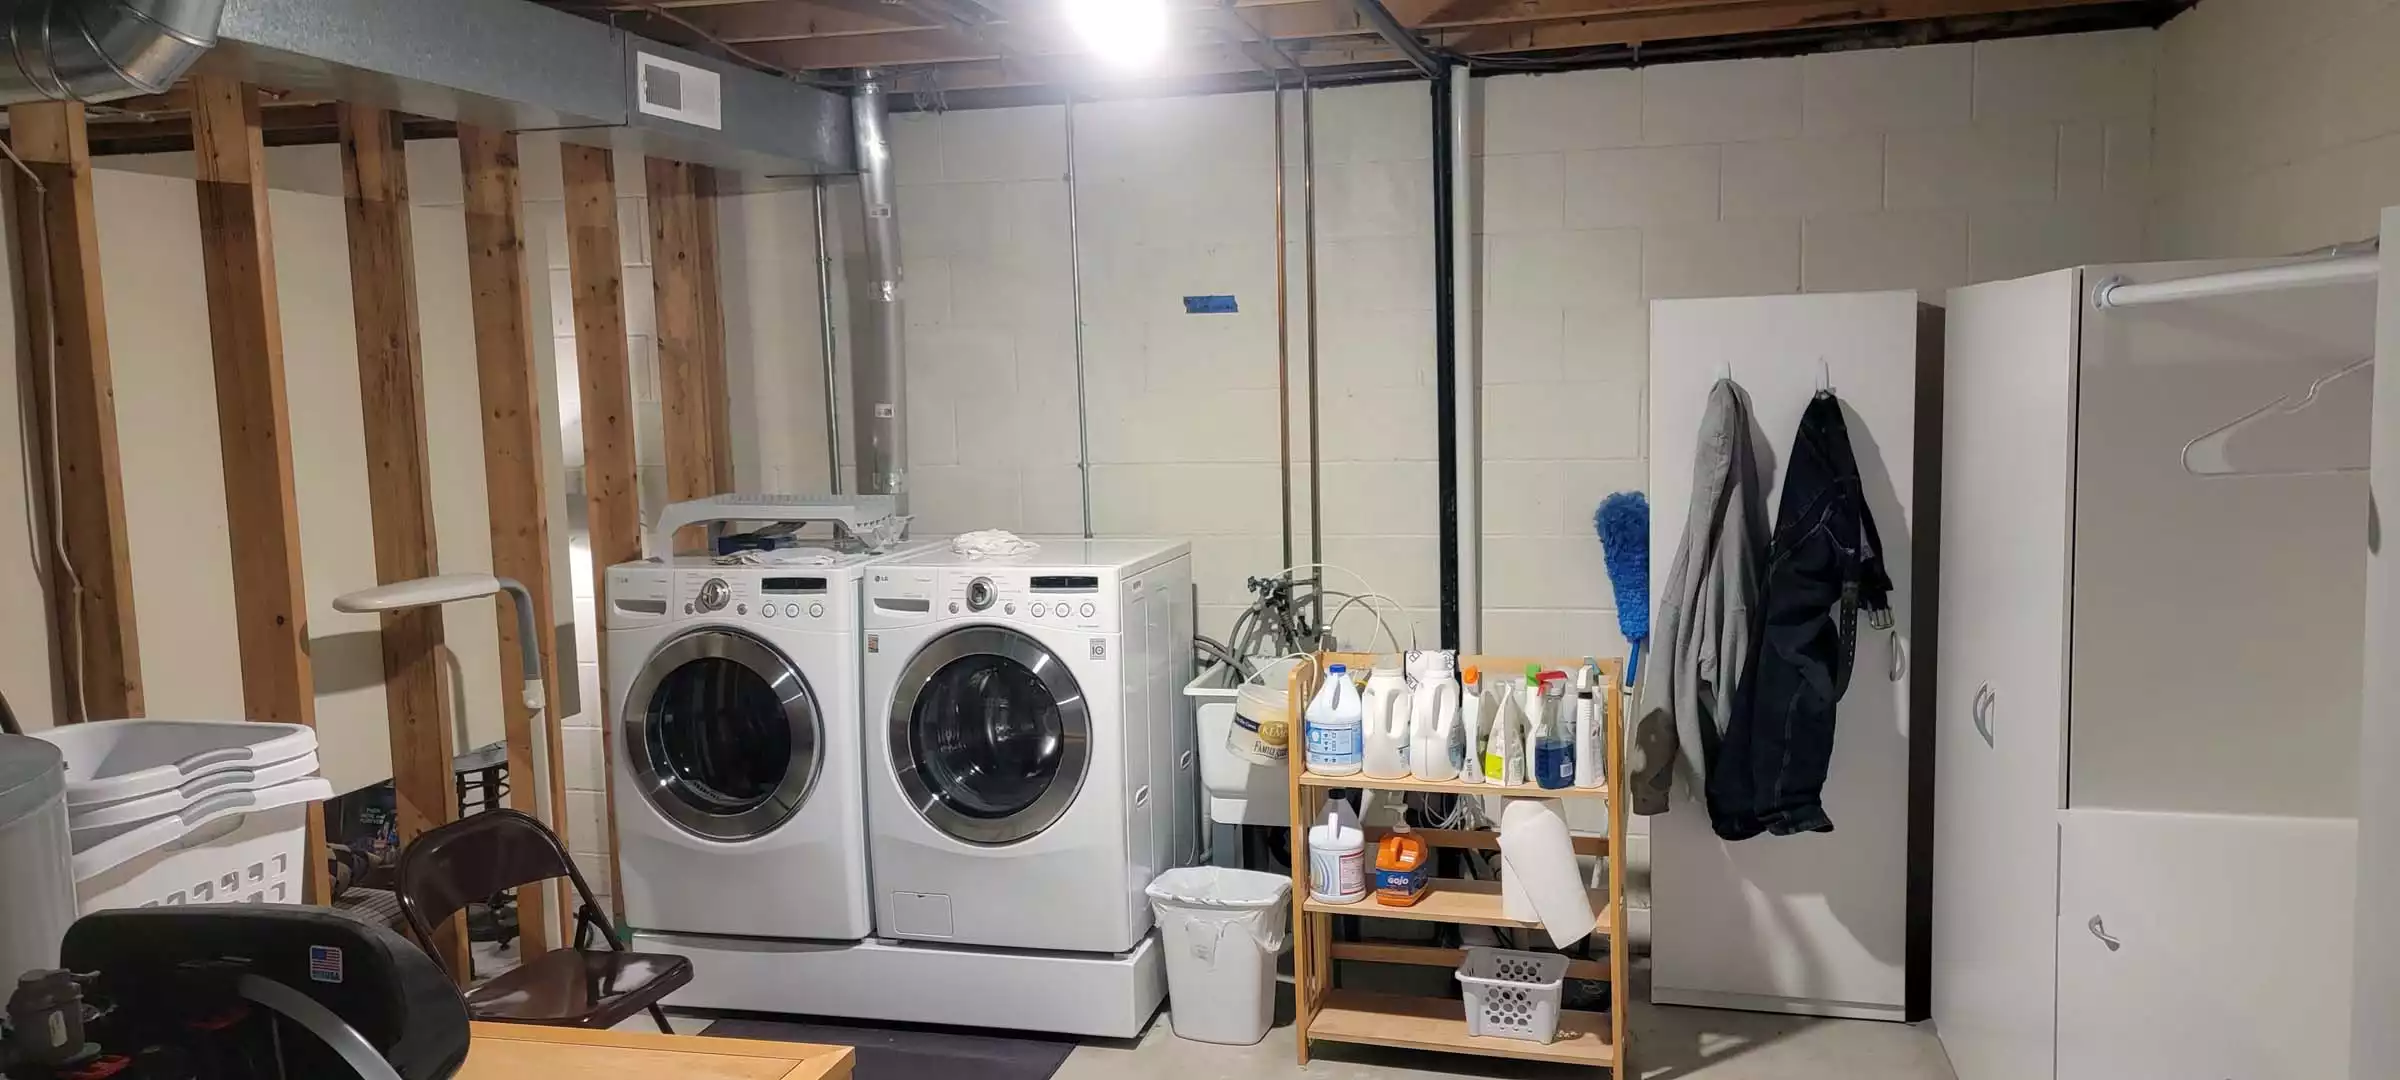 Shoreview Lower Level Laundry Room BEFORE Remodel